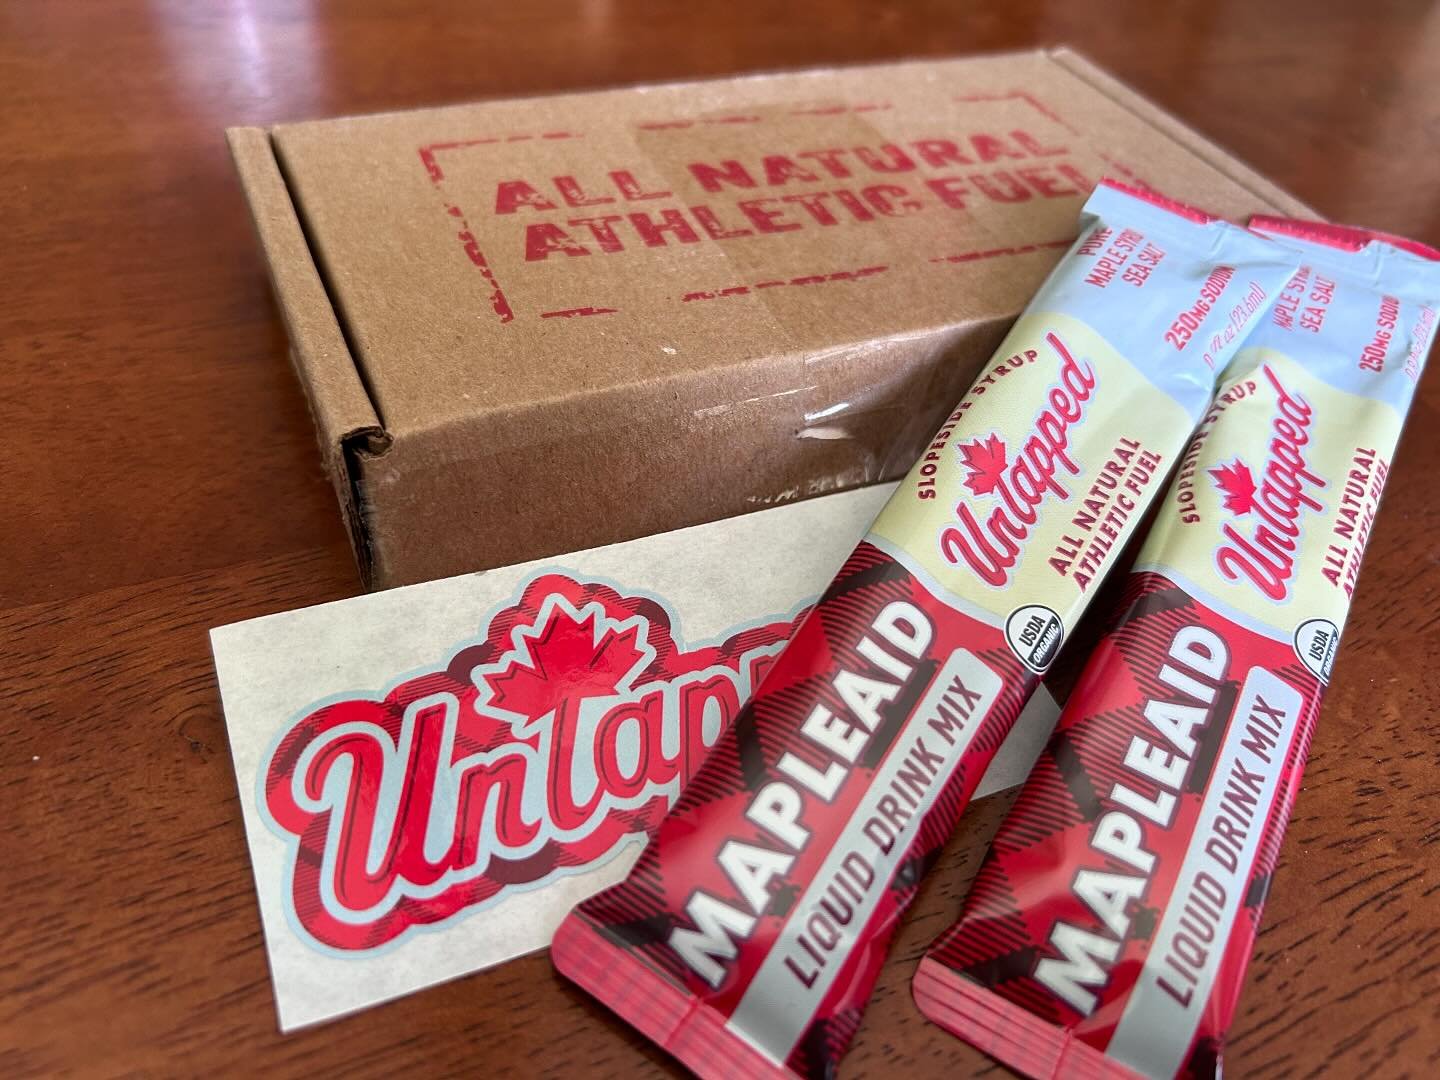 We just posted our review of UnTapped (@untappedmaple) Mapleaid hydration liquid drink mix on creakybottombracket.com. Untapped kept the hydration mix simple by offering straight up maple syrup with 250 mg of sodium along with syrup&rsquo;s natural b